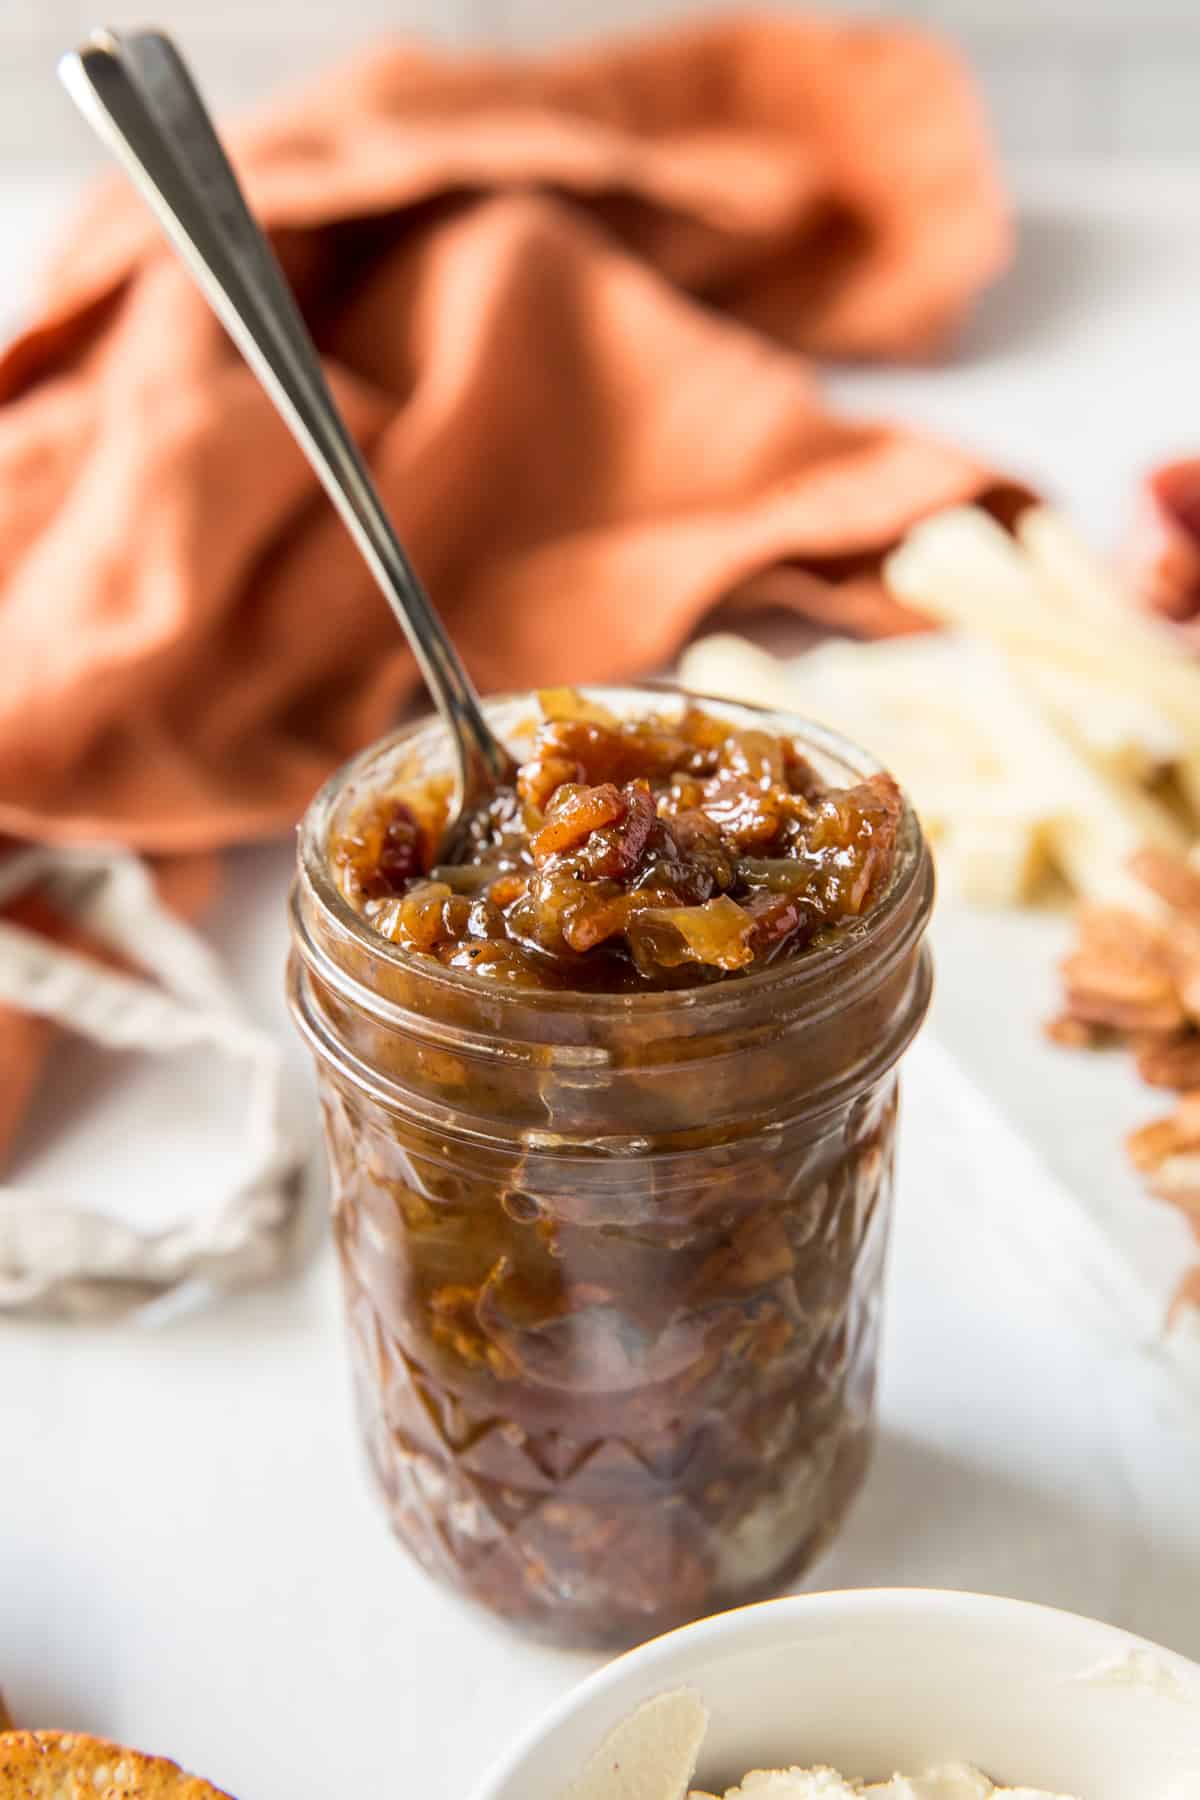 A spoon resting in a jar of bacon jam.